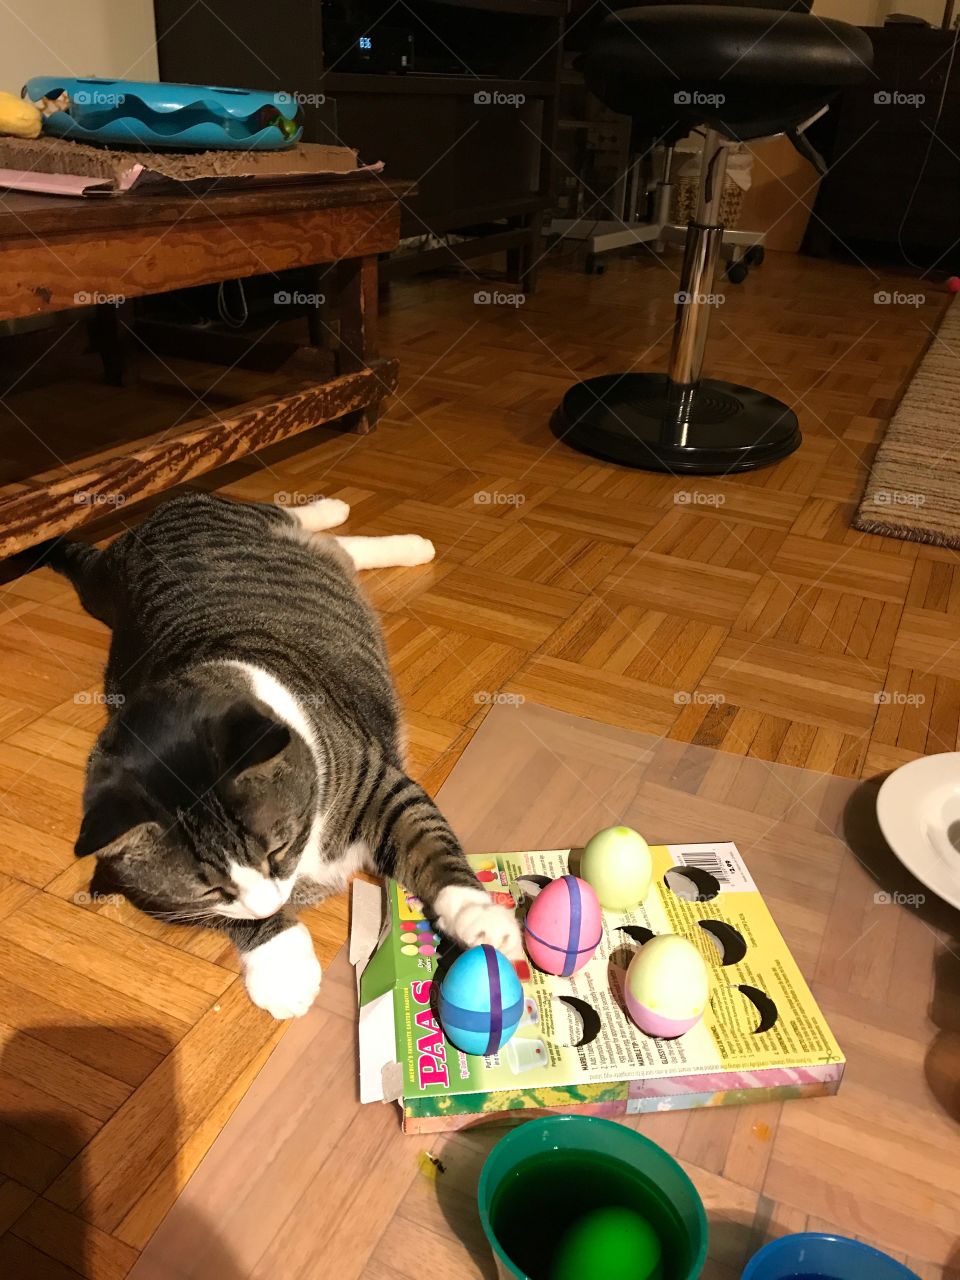 Helping to color eggs